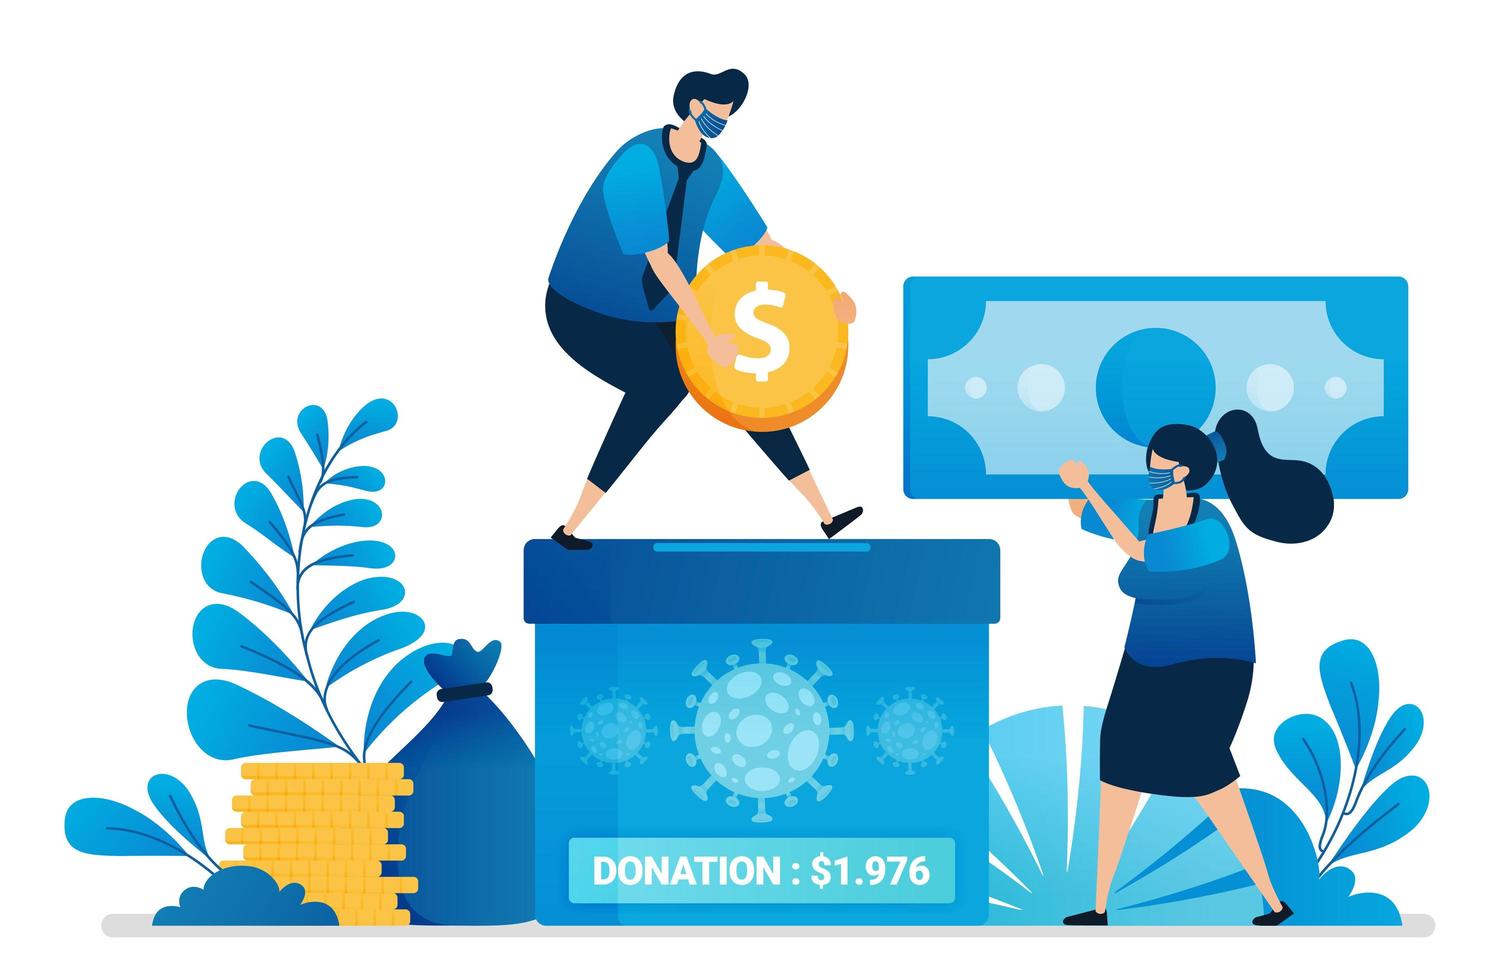 Vector illustration of donation money for handling covid-19. Charity for the economy of people affected by the pandemic. Can be used for website, web, mobile apps, flyer, banner, template, poster